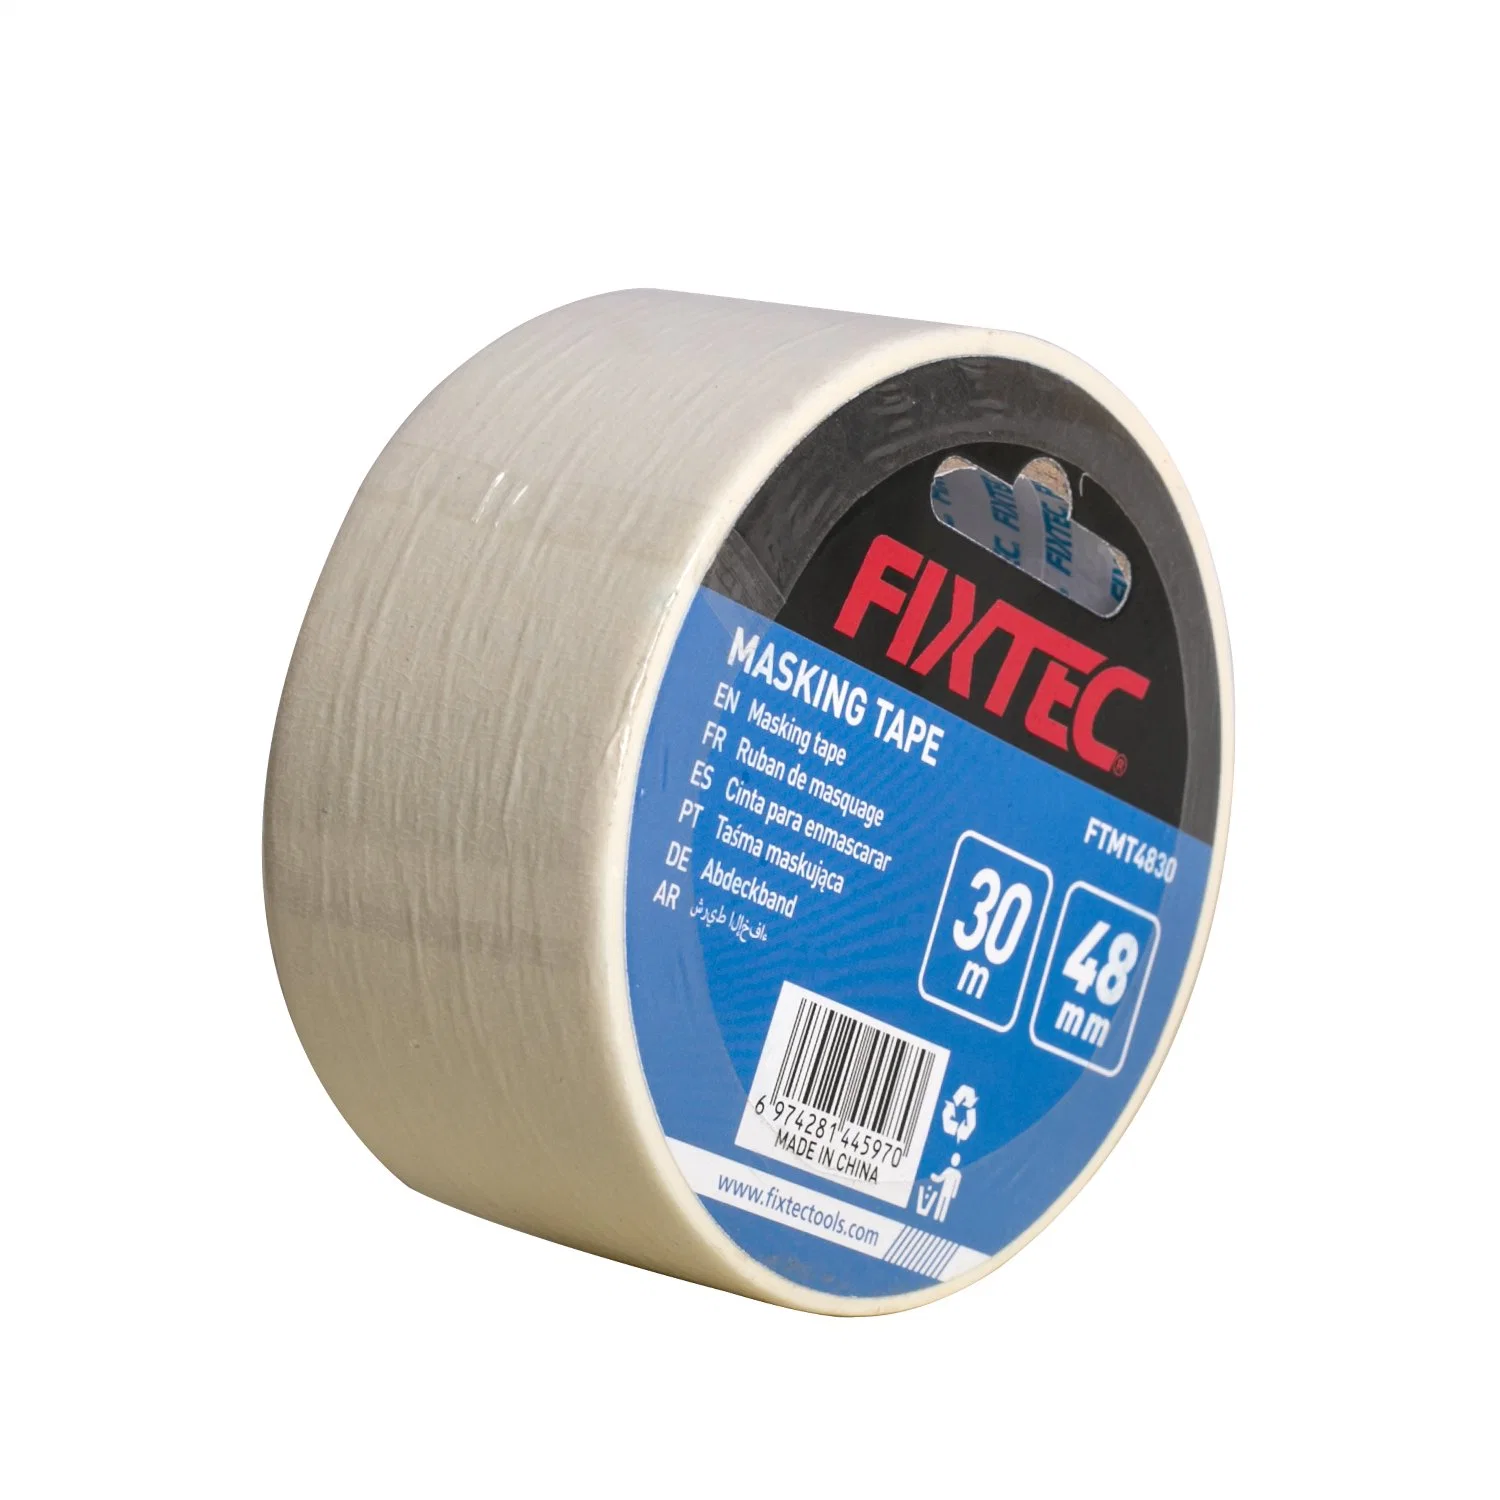 Fixtec Manufacturer General Purpose Masking Tape for Painters